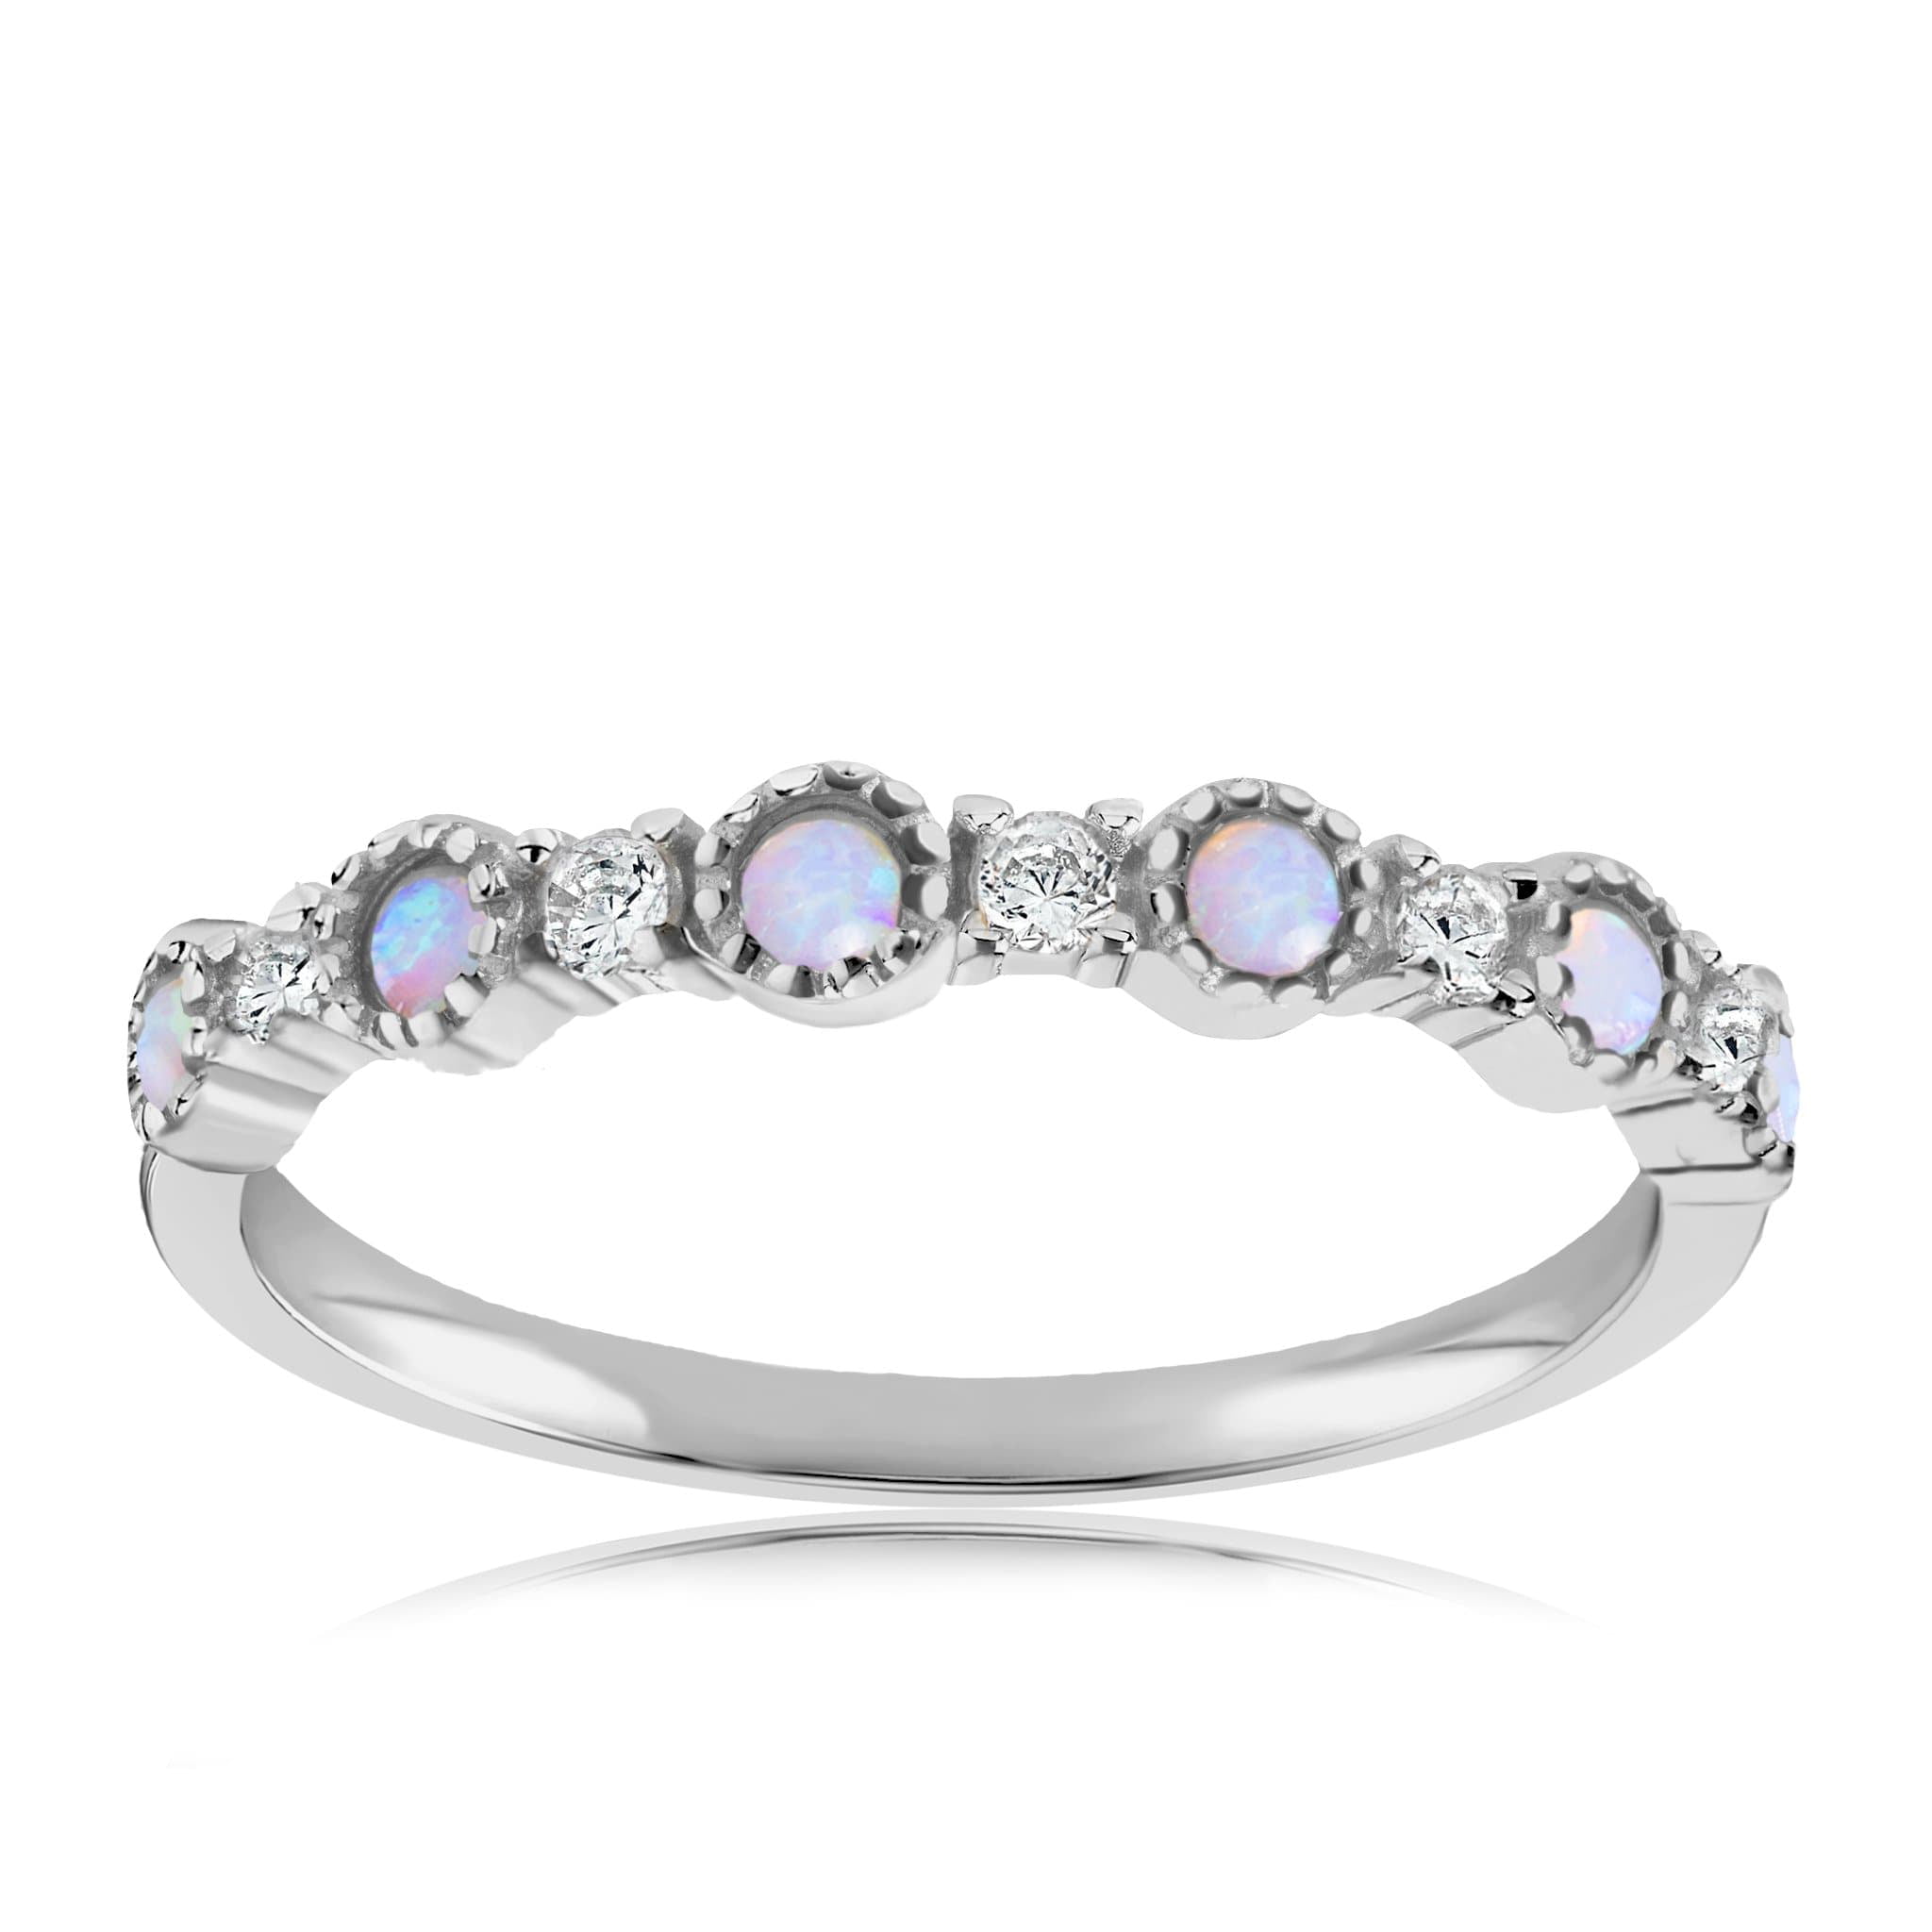 Details about   925 Sterling Silver Band & Opal Gemstone Statement Handmade Ring All Size-C-17 